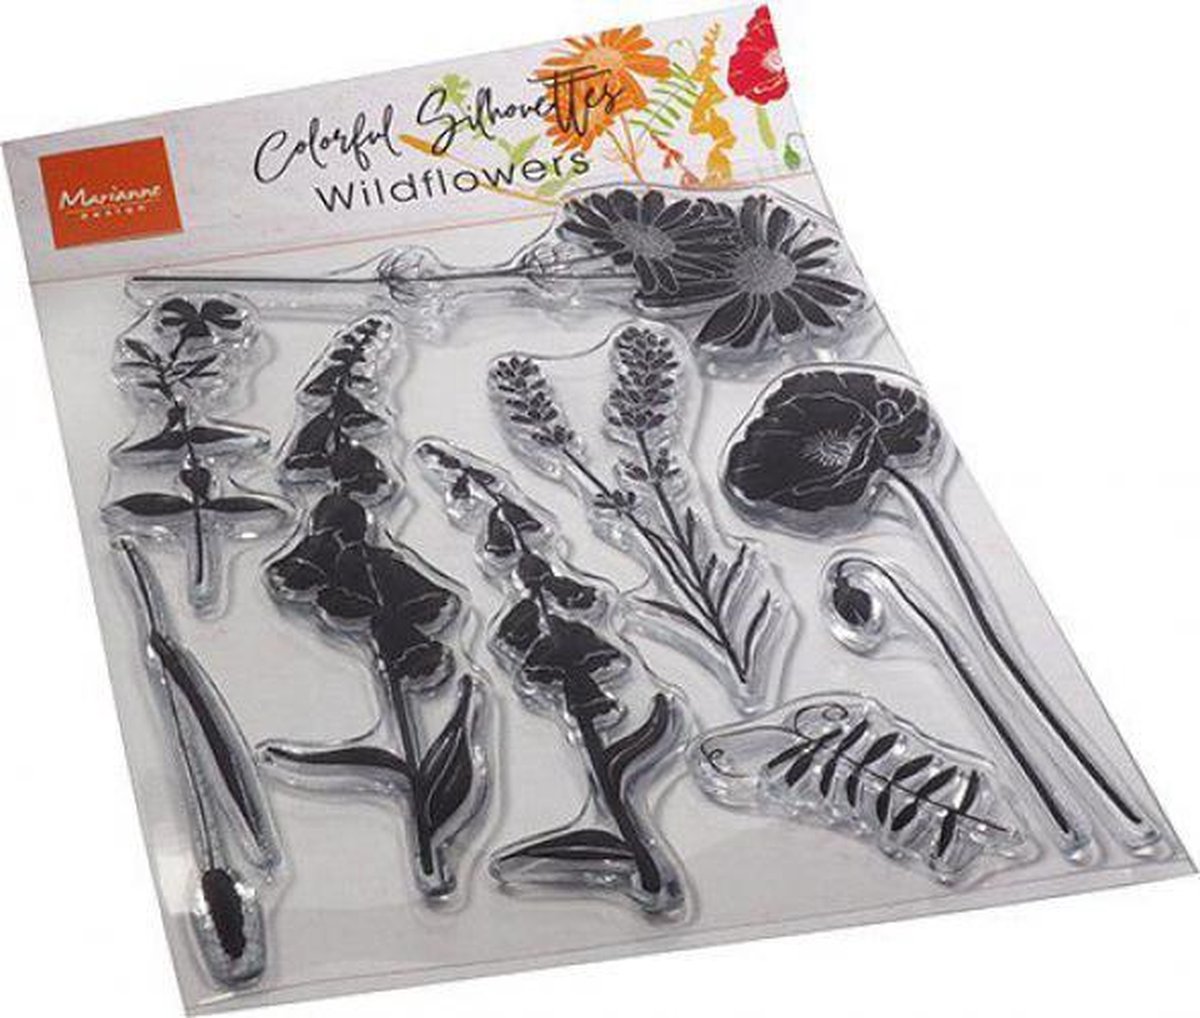 Marianne Design - Clear Stamps Colorful Silhouette Wilde Blo